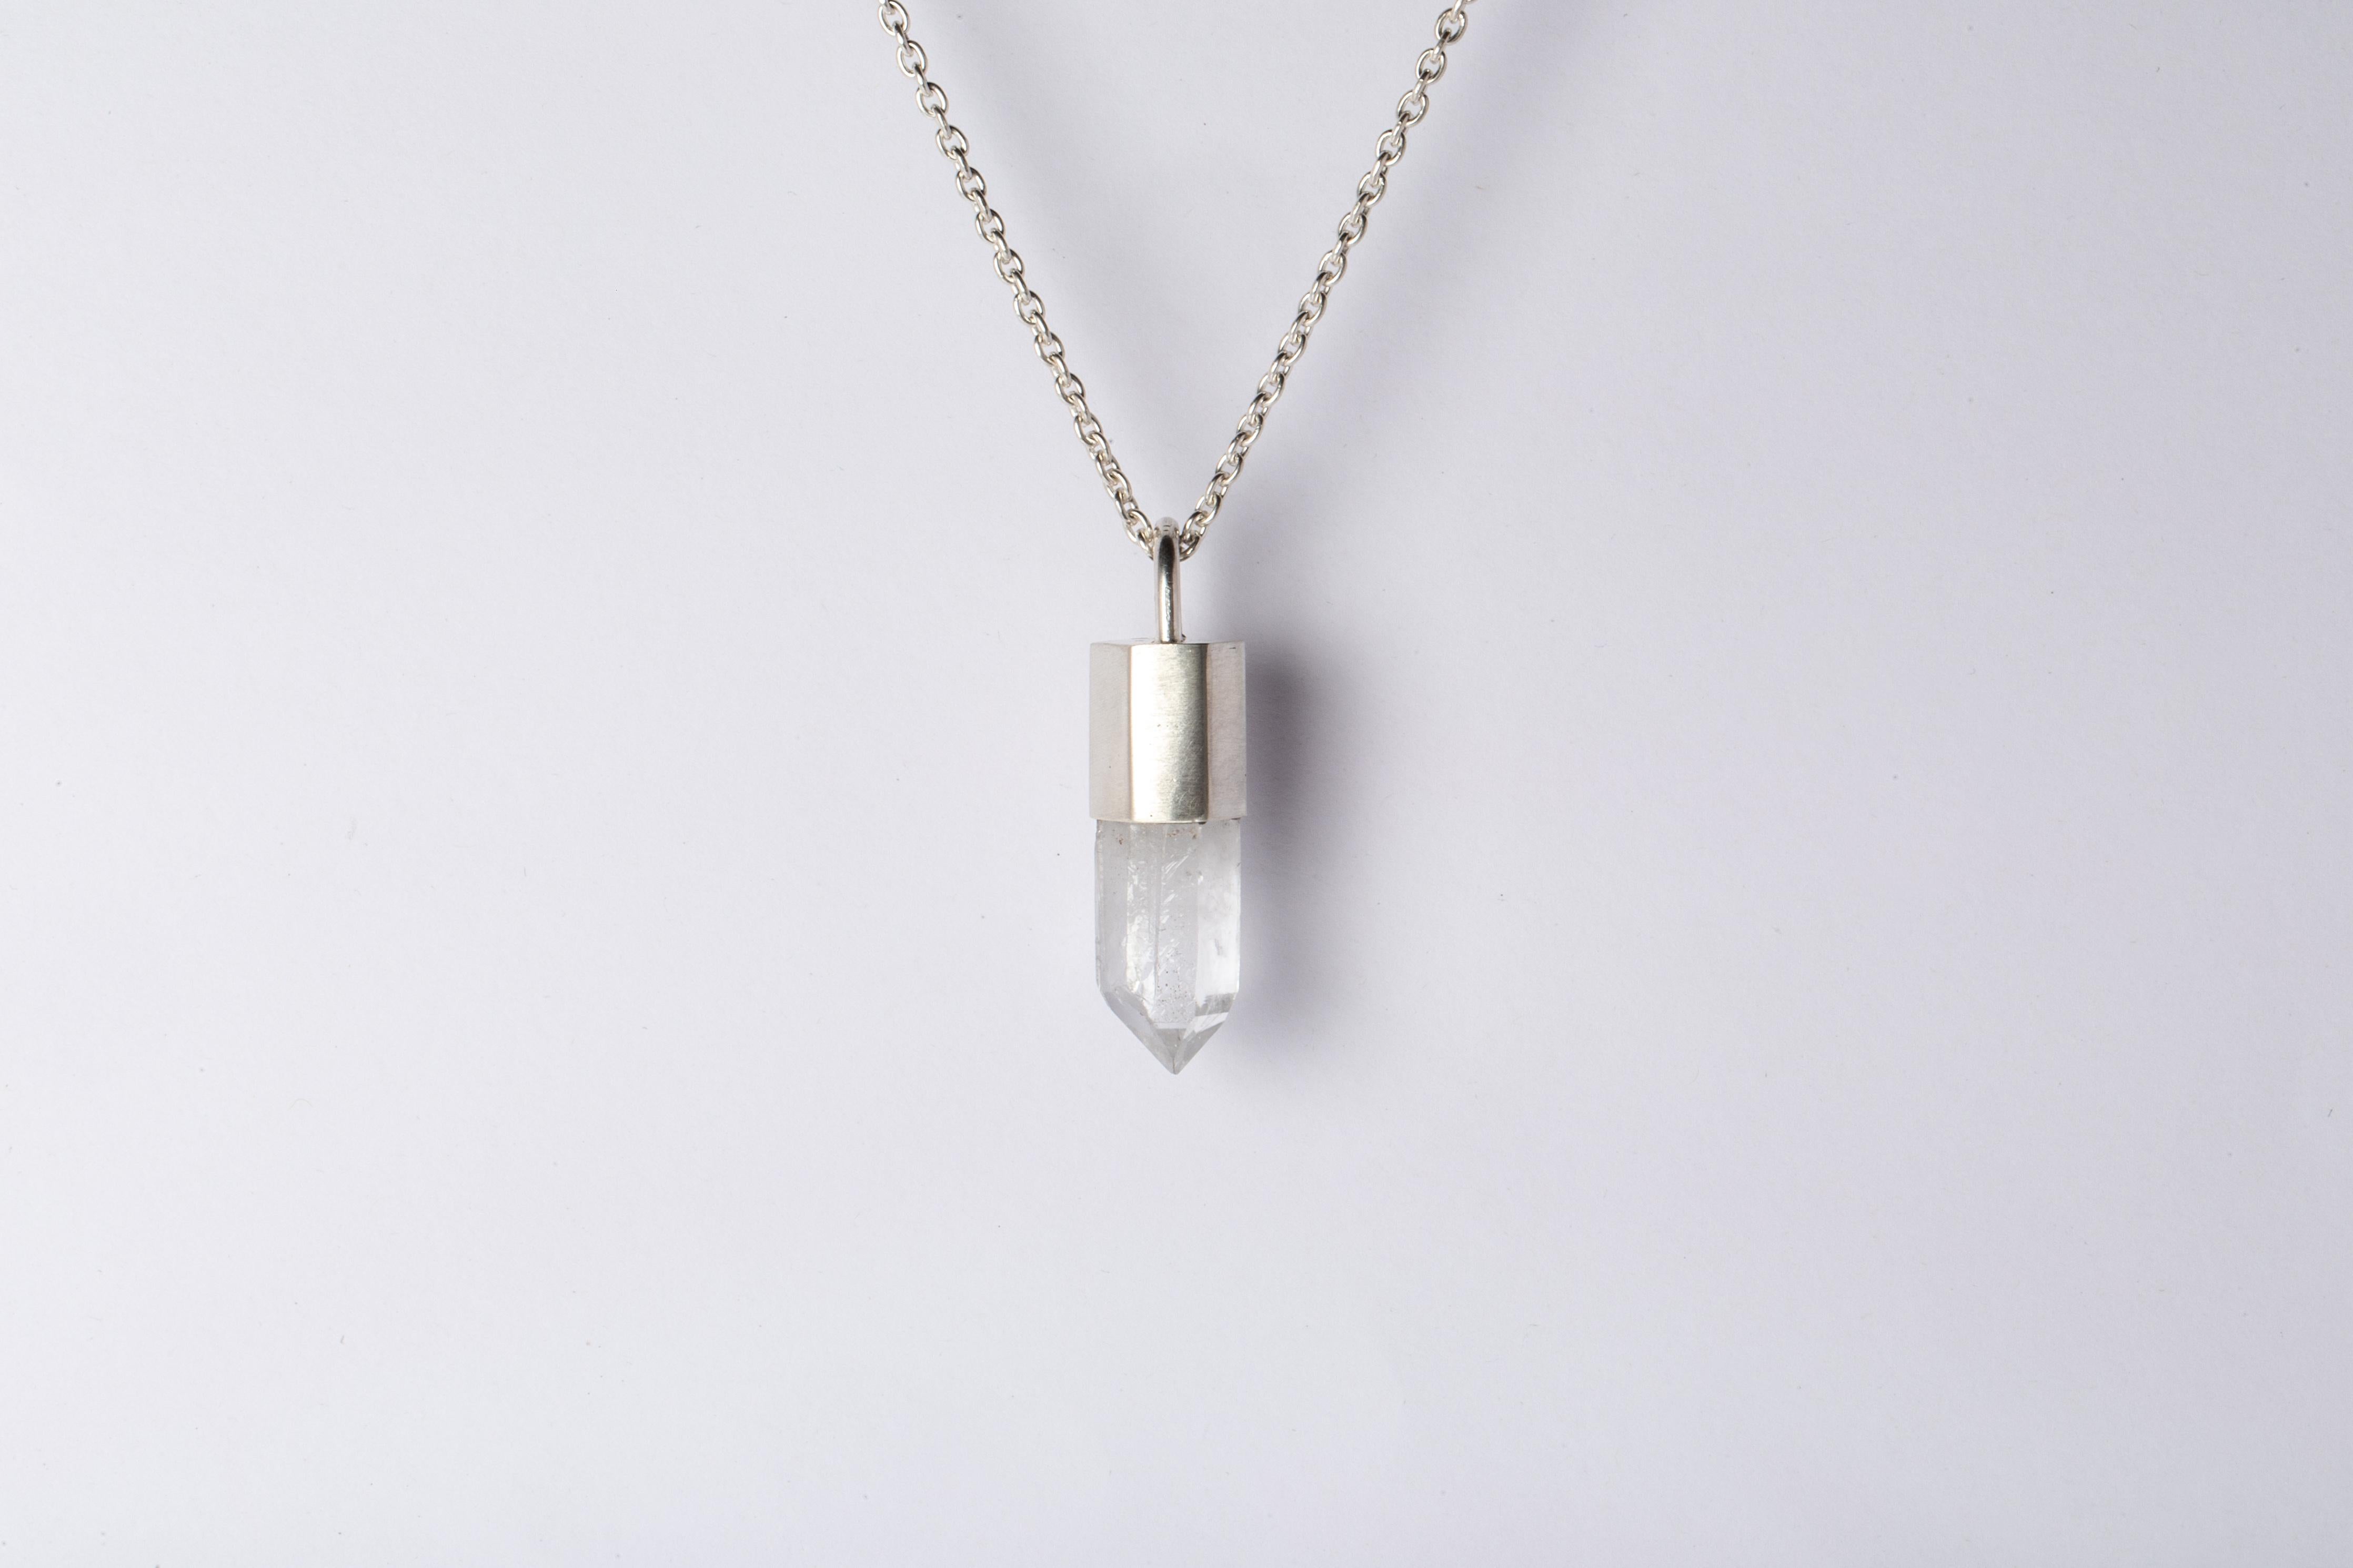 Pendant necklace in matte sterling silver and a rough of misc quartz. It comes on 74 cm sterling silver chain.
The Talisman series is an exploration into the power of natural crystals. The crystals used in these pieces are discovered through